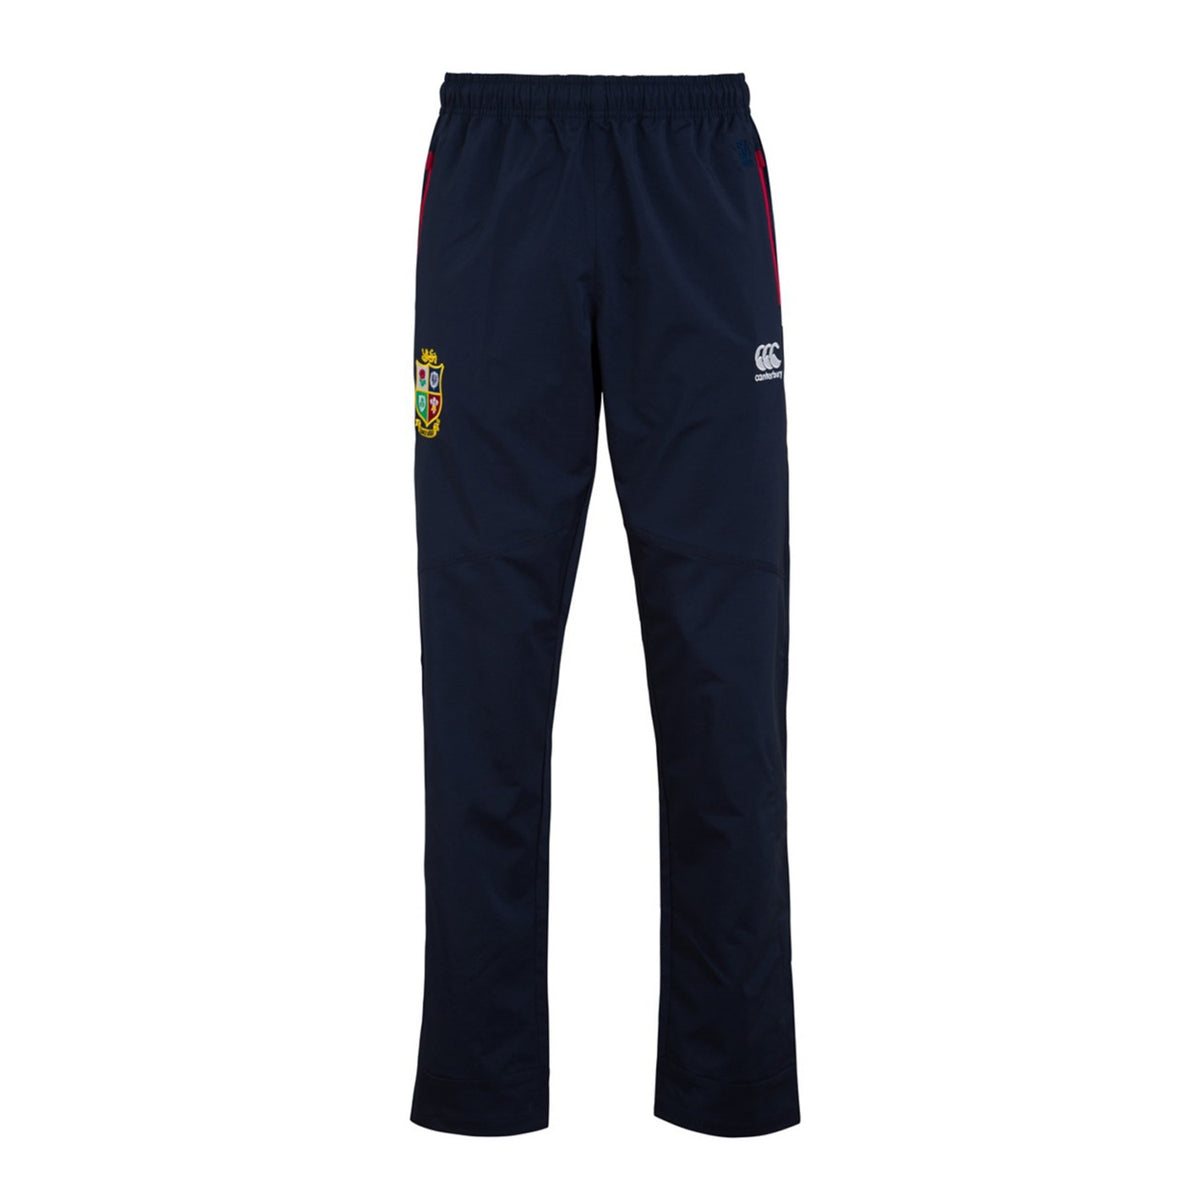 British and Irish Lions Official Mens Tapered Pres Pant